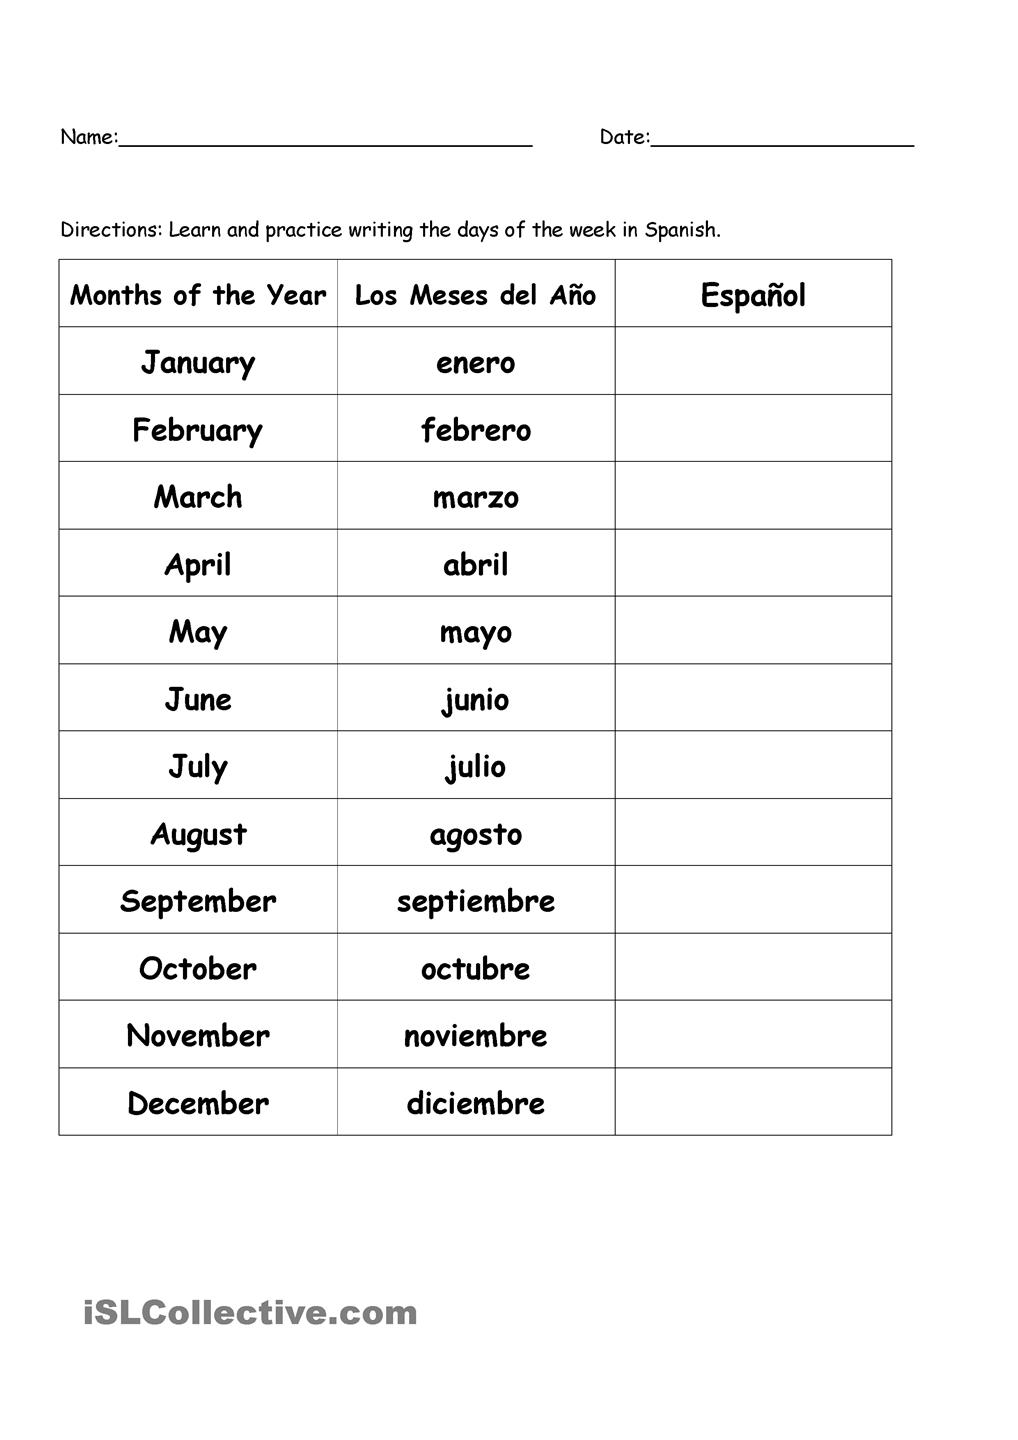 spanish-months-of-the-year-worksheet